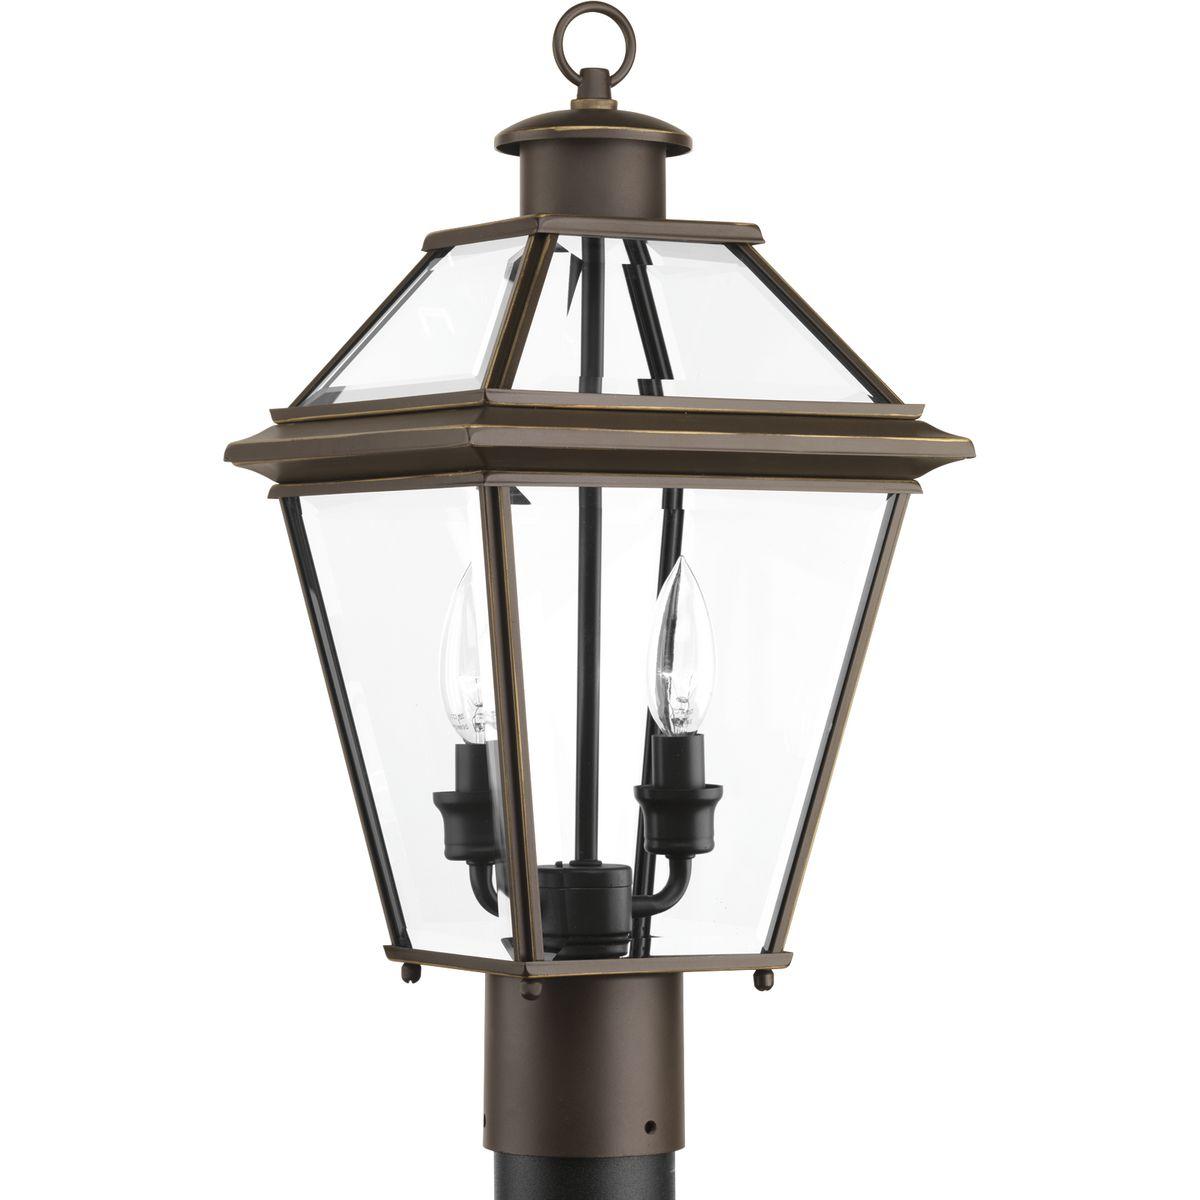 Hubbell P6437-20 The two-light post lantern from the Burlington outdoor collection is constructed from aluminum for durable, weather-resistant performance. An Antique Bronze finish complements the clear beveled glass. Fits 3" post (order separately).  ; Antique Bronze fin